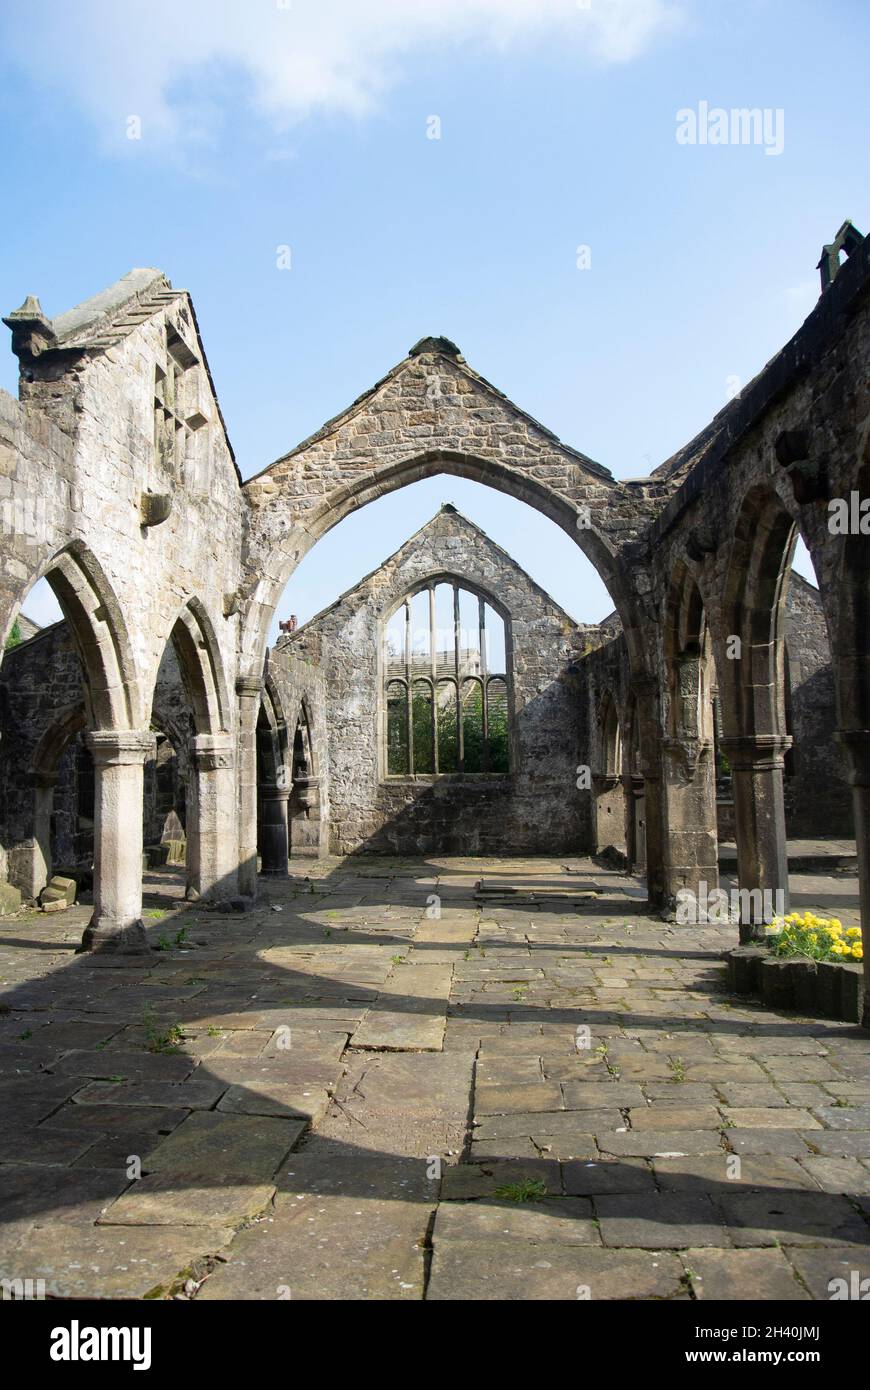 Heptonstall, Yorkshire  Ruins of the historic Saint Thomas church in the heart of this small charming village Vertical shot Stock Photo